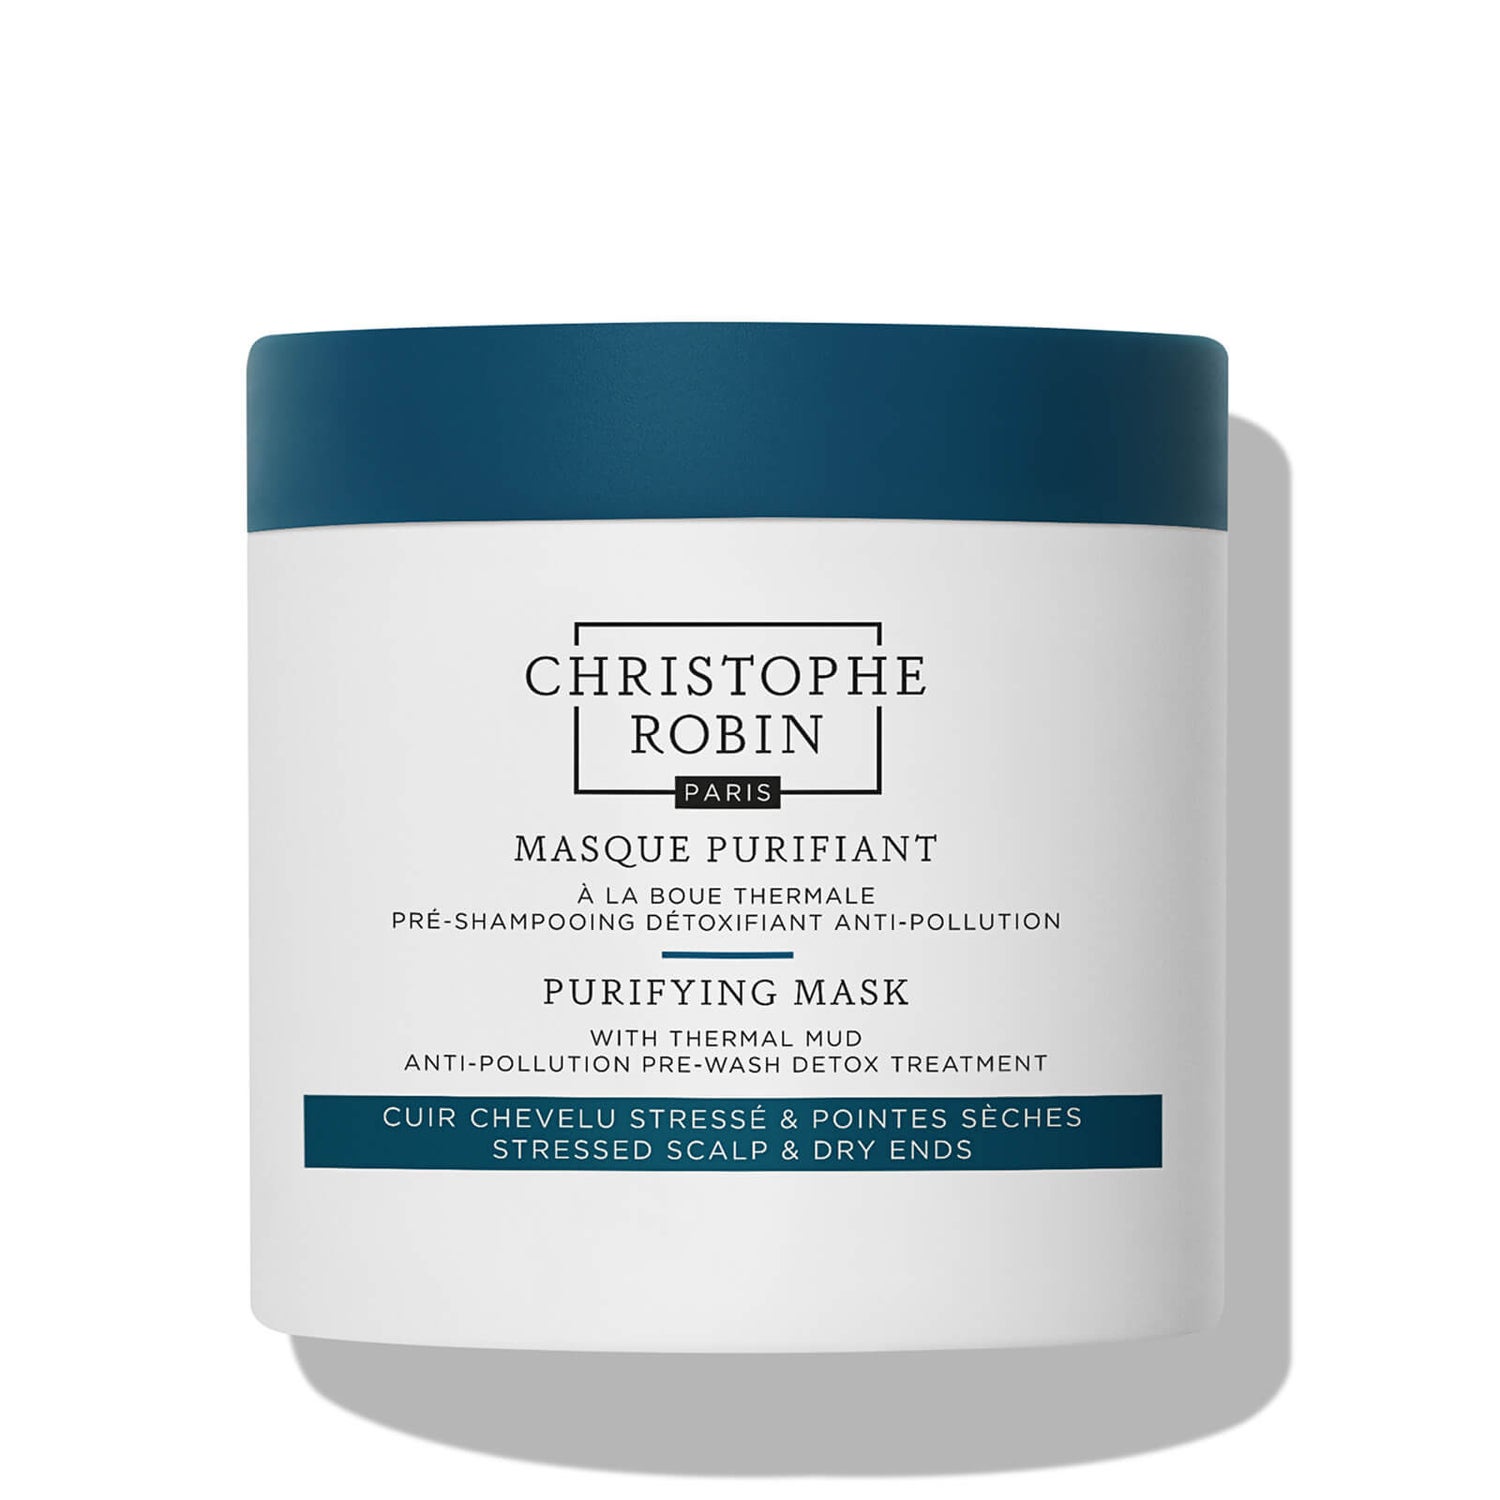 Christophe Robin Purifying Mask with Thermal Mud 250ml